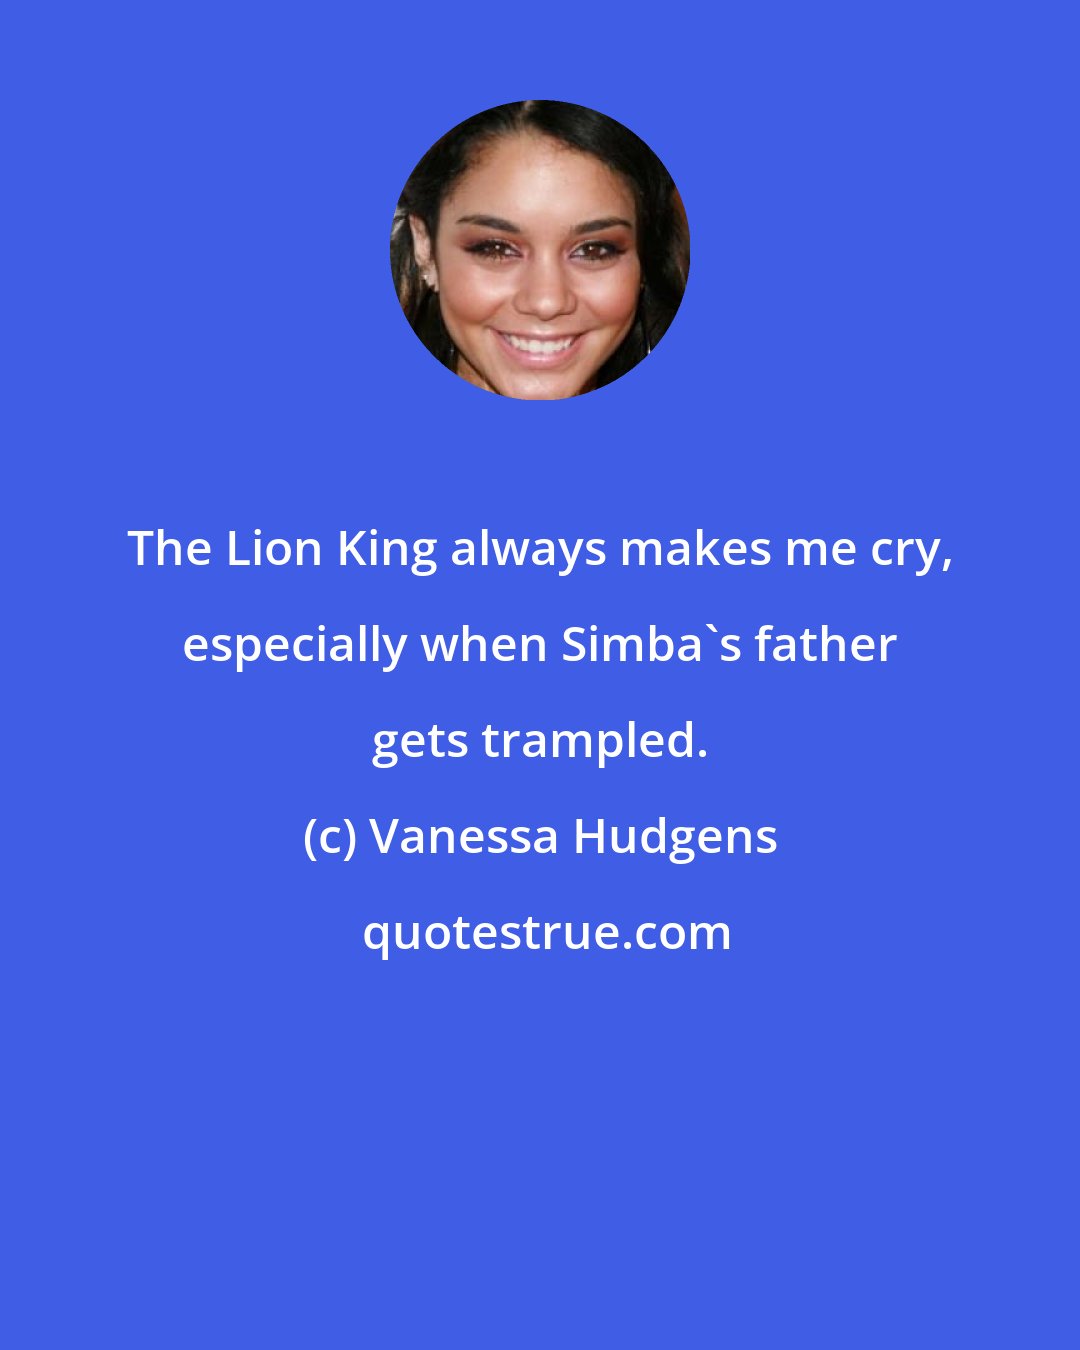 Vanessa Hudgens: The Lion King always makes me cry, especially when Simba's father gets trampled.